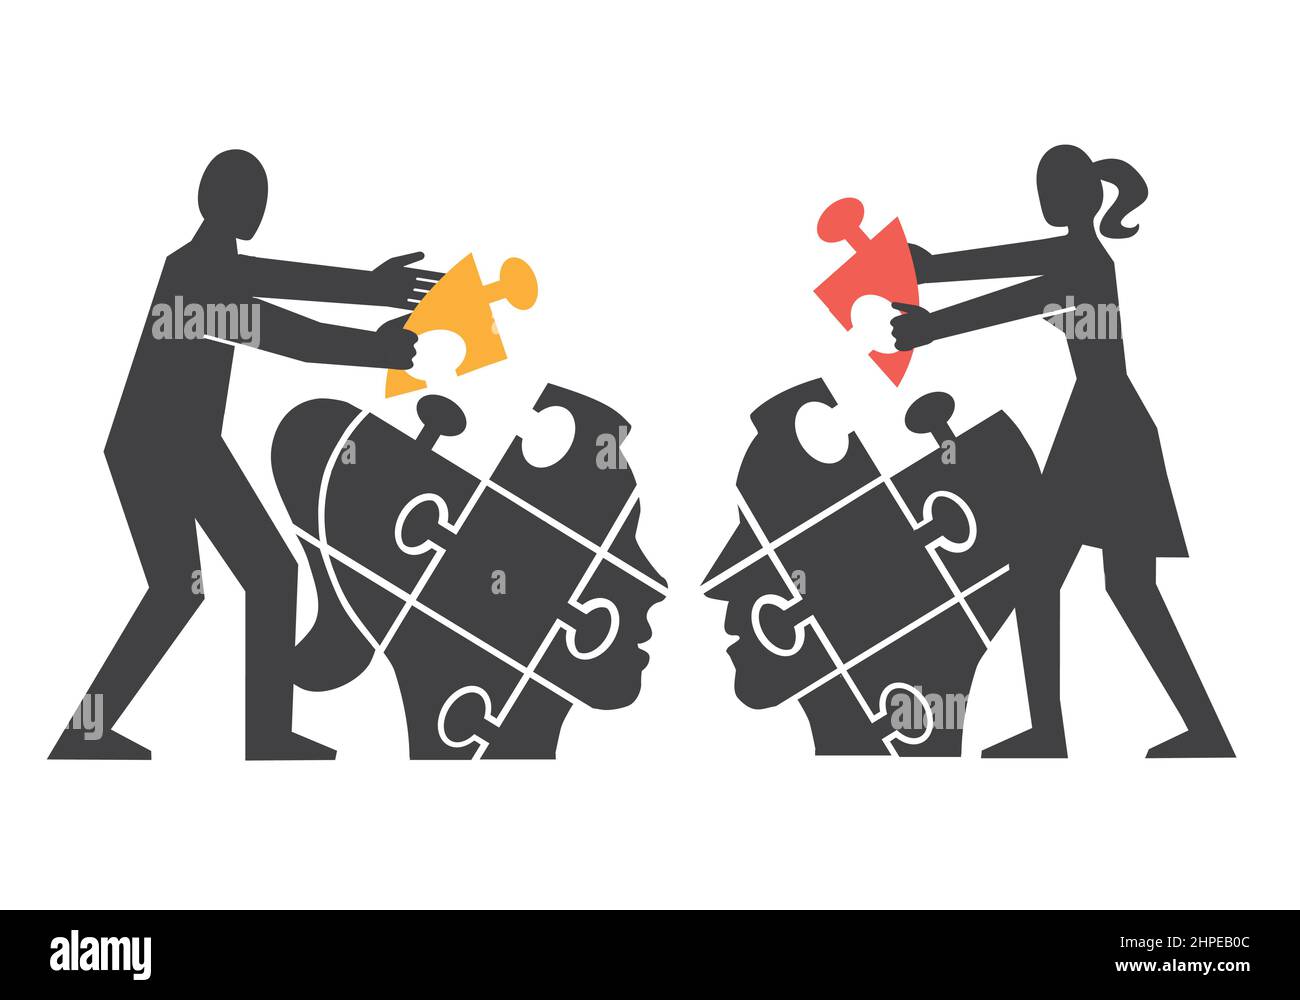 : Couple,Mutual understanding and dialog, puzzle concept. Illustration of couple assembling a puzzle of partner's head. Stock Vector